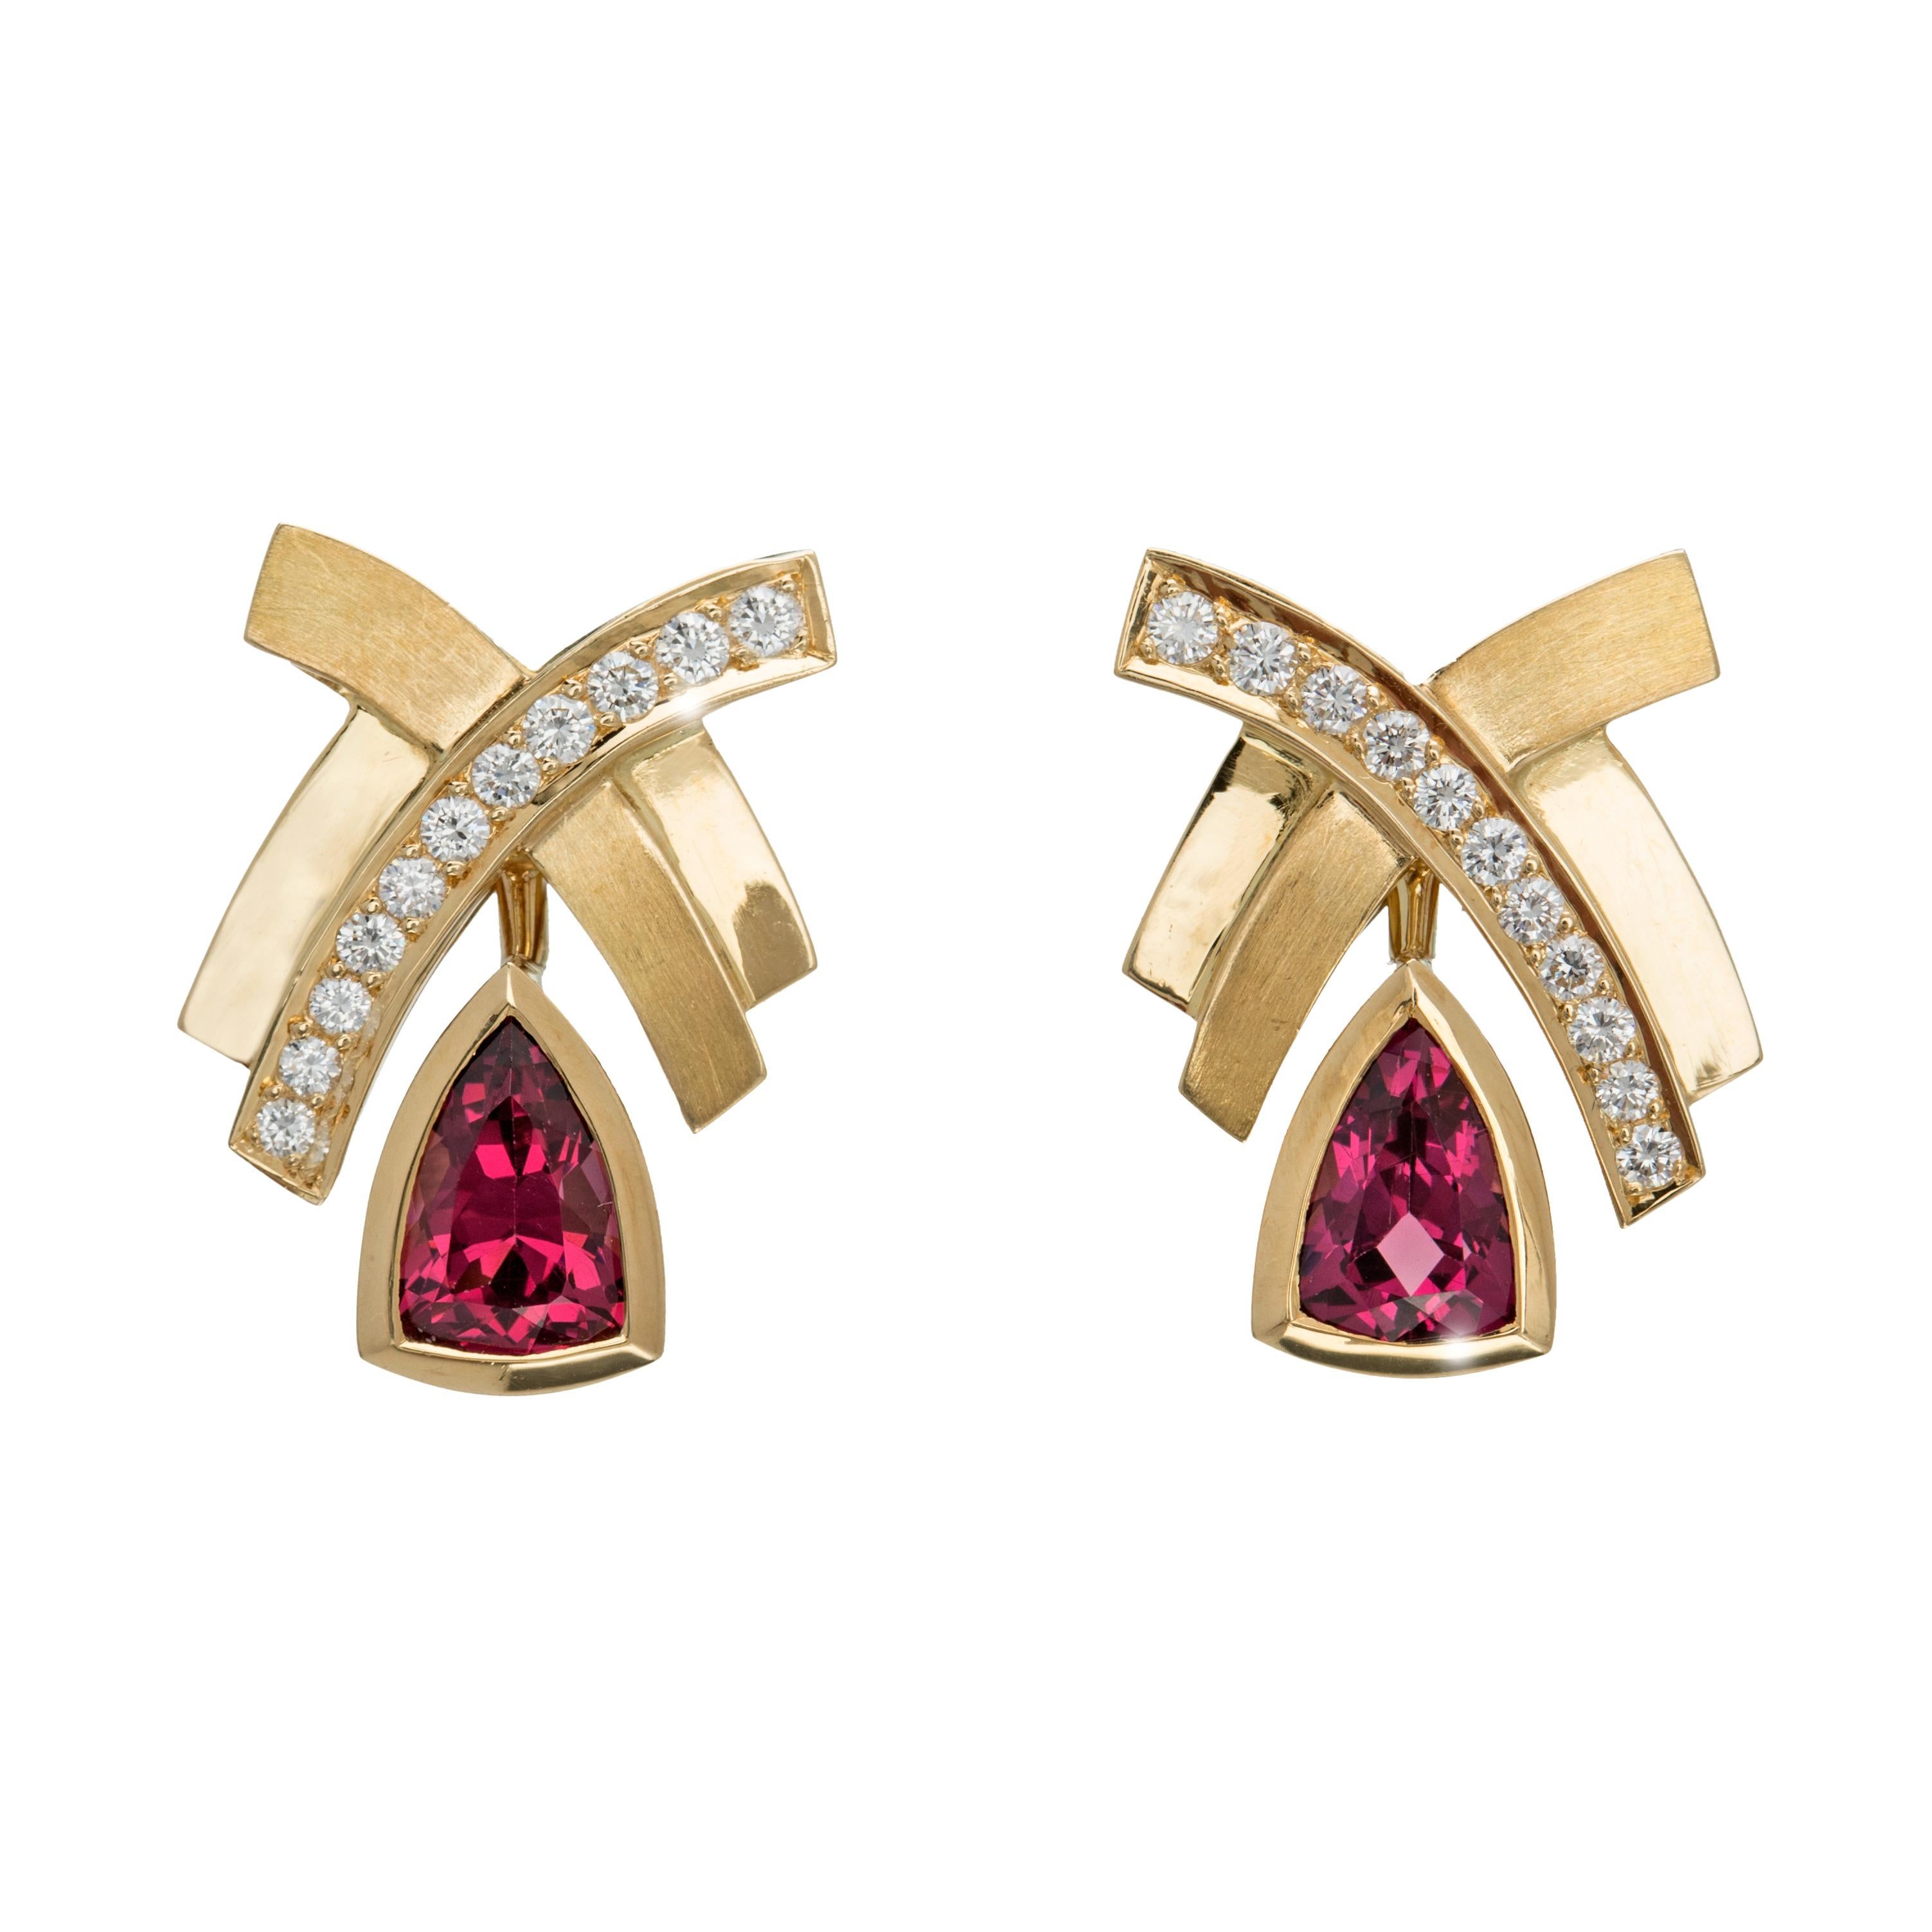 “X” marks the spot, and these 18k yellow gold earrings in matte and polished finishes certainly are a treasure. The avant-garde styling of the “X” , with a section adorned with shimmering diamonds, hangs above the treasure of the richly coloured